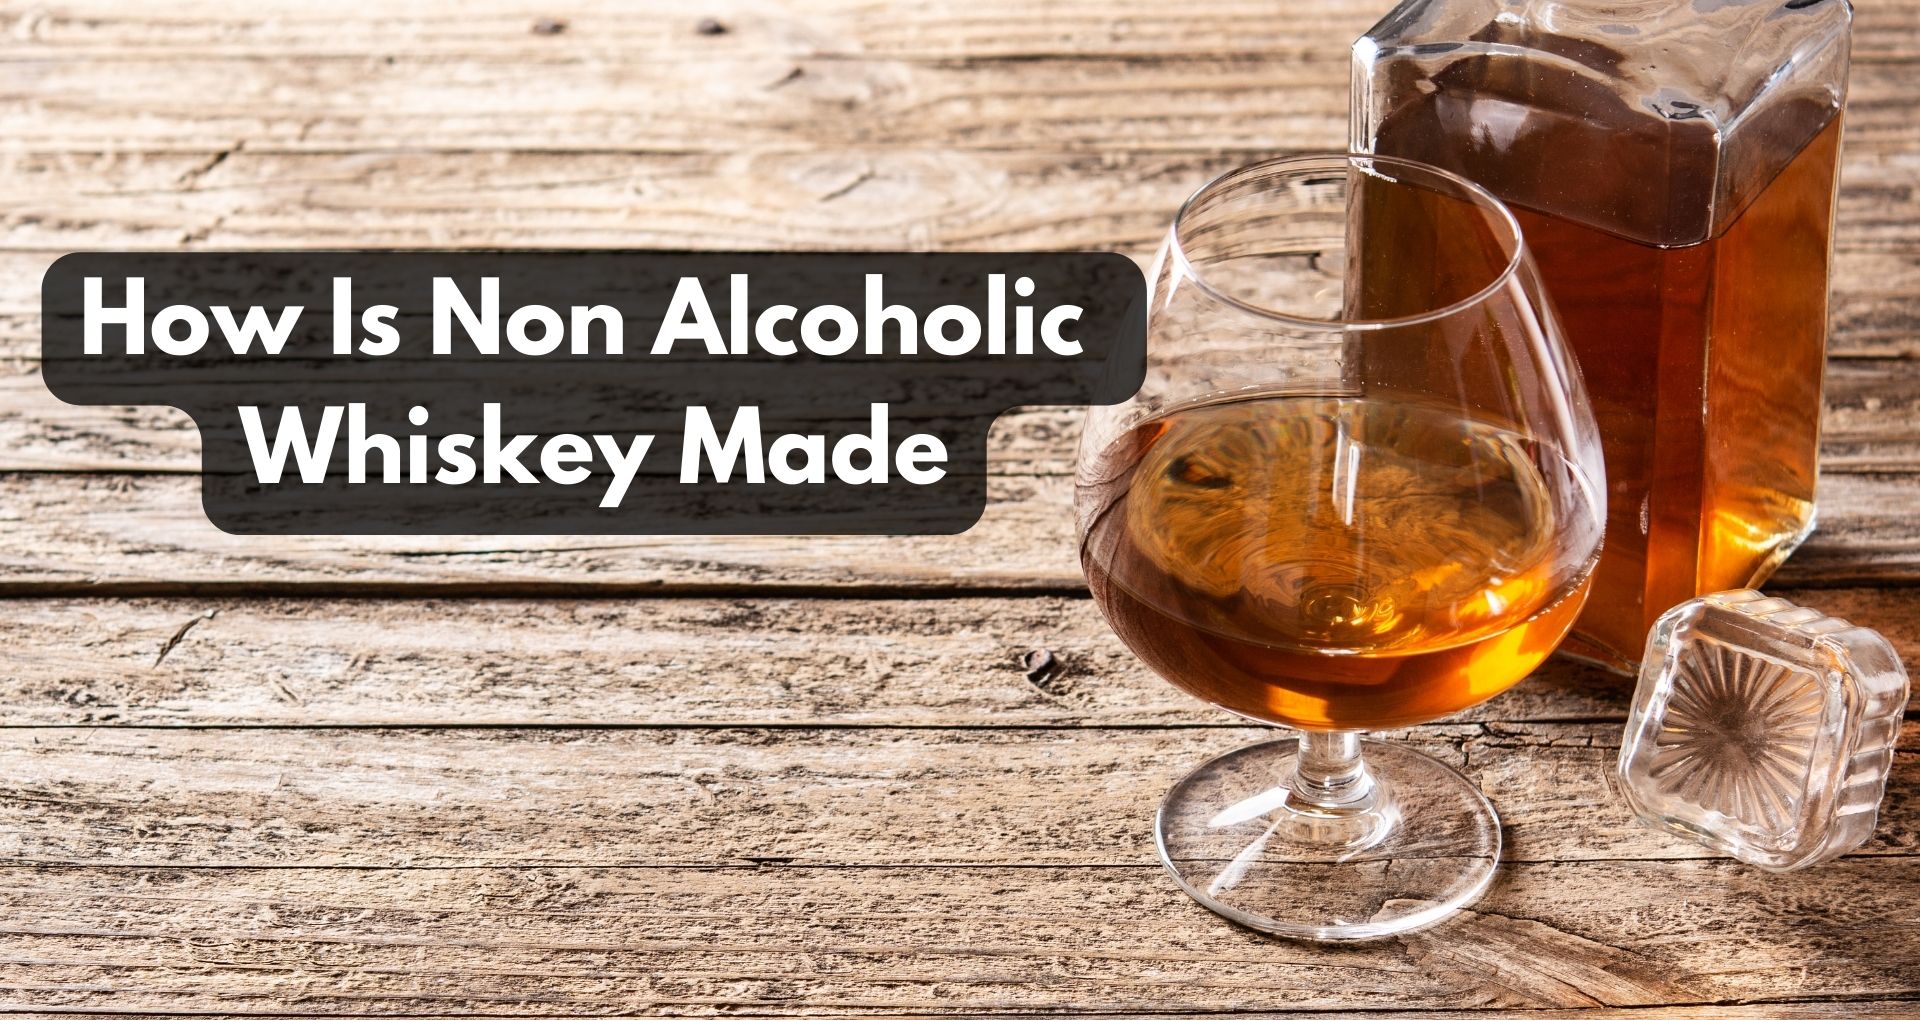 How Is Non Alcoholic Whiskey Made?